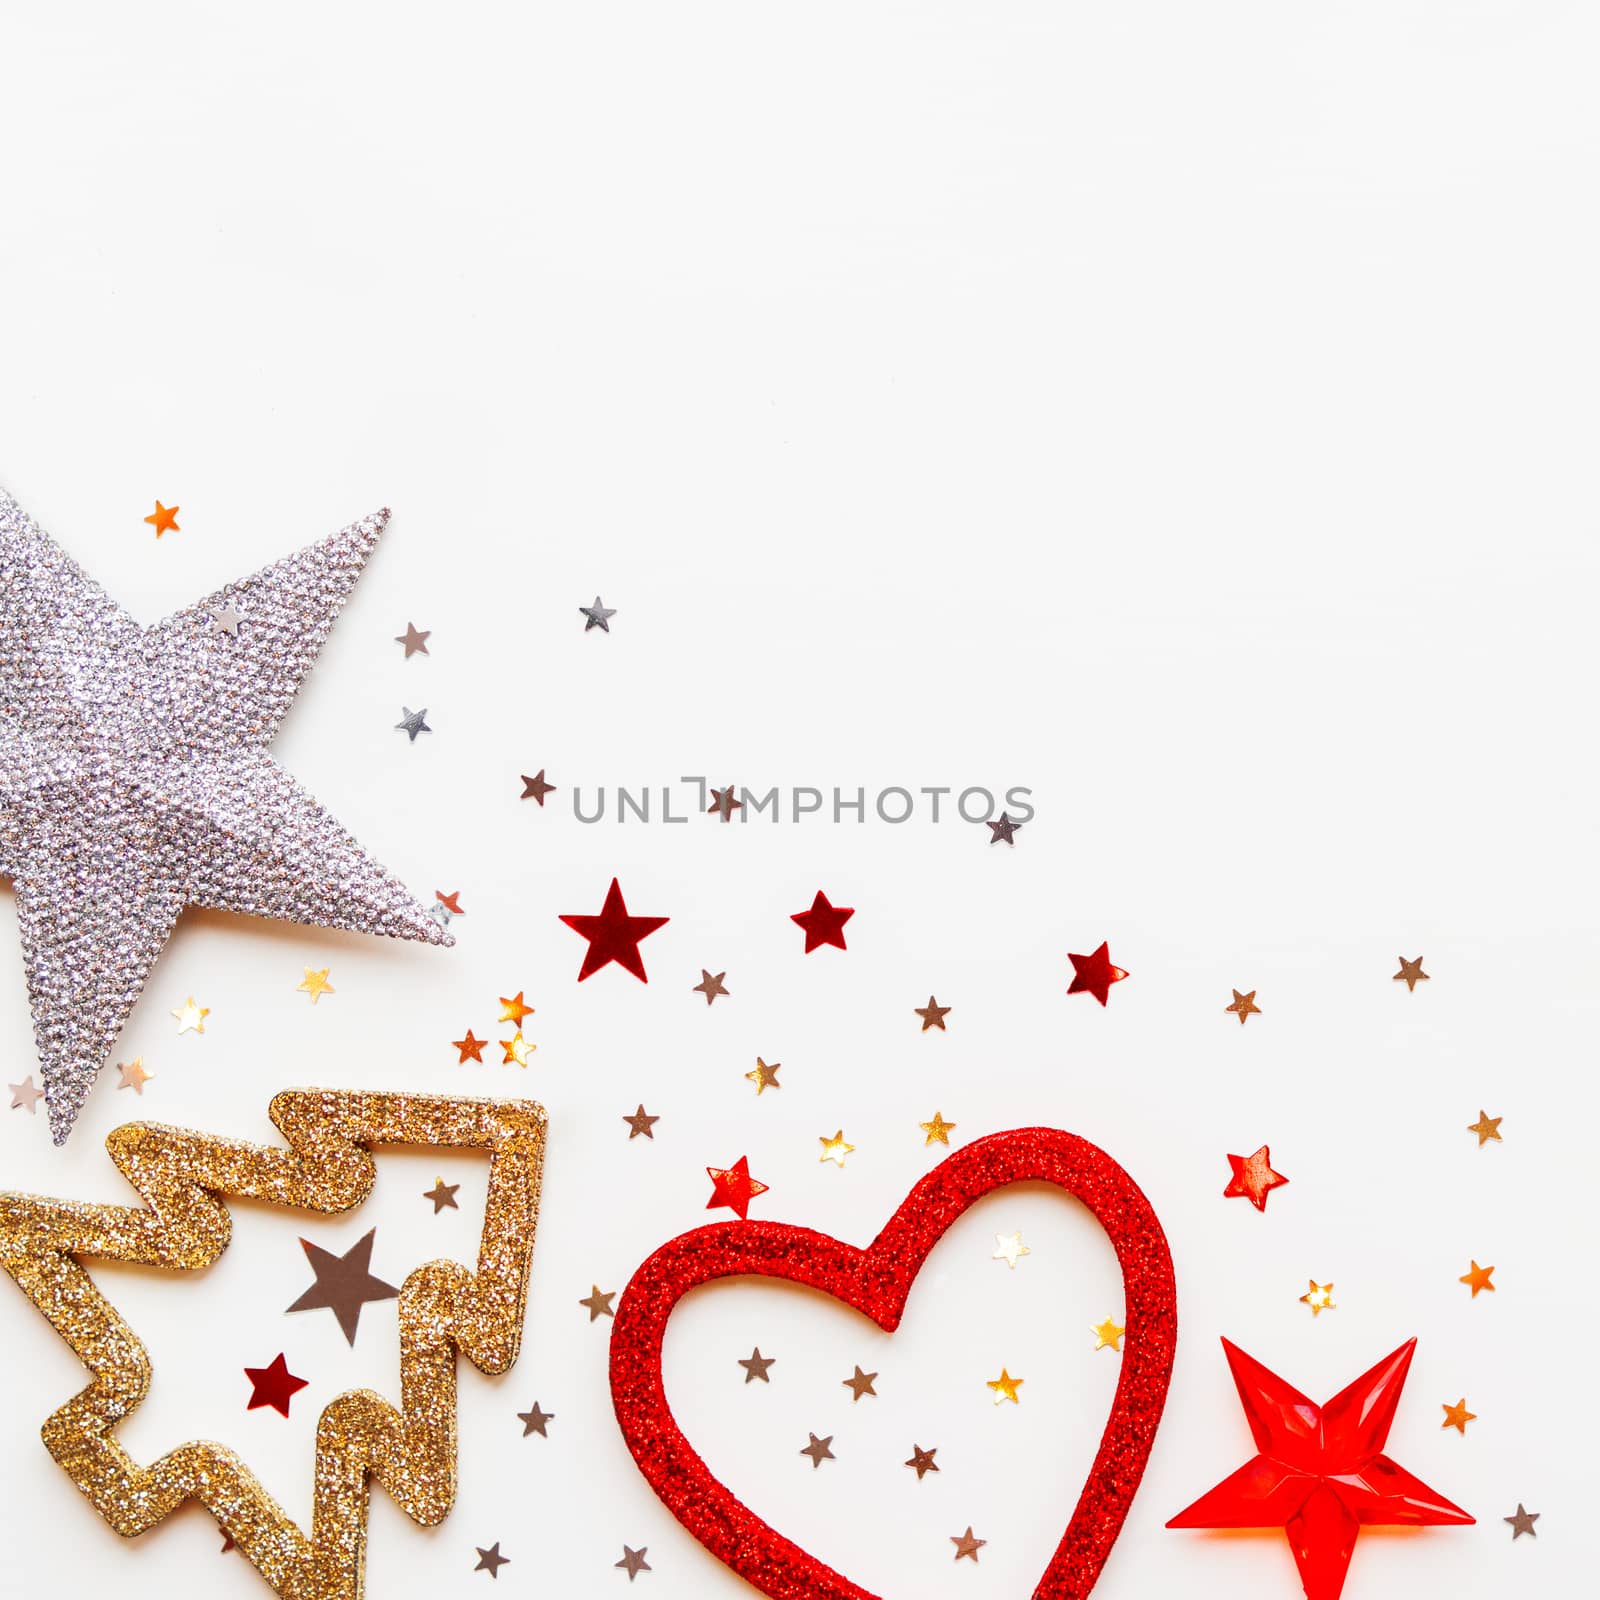 Christmas and New Year background with decorations - shiny stars by aksenovko